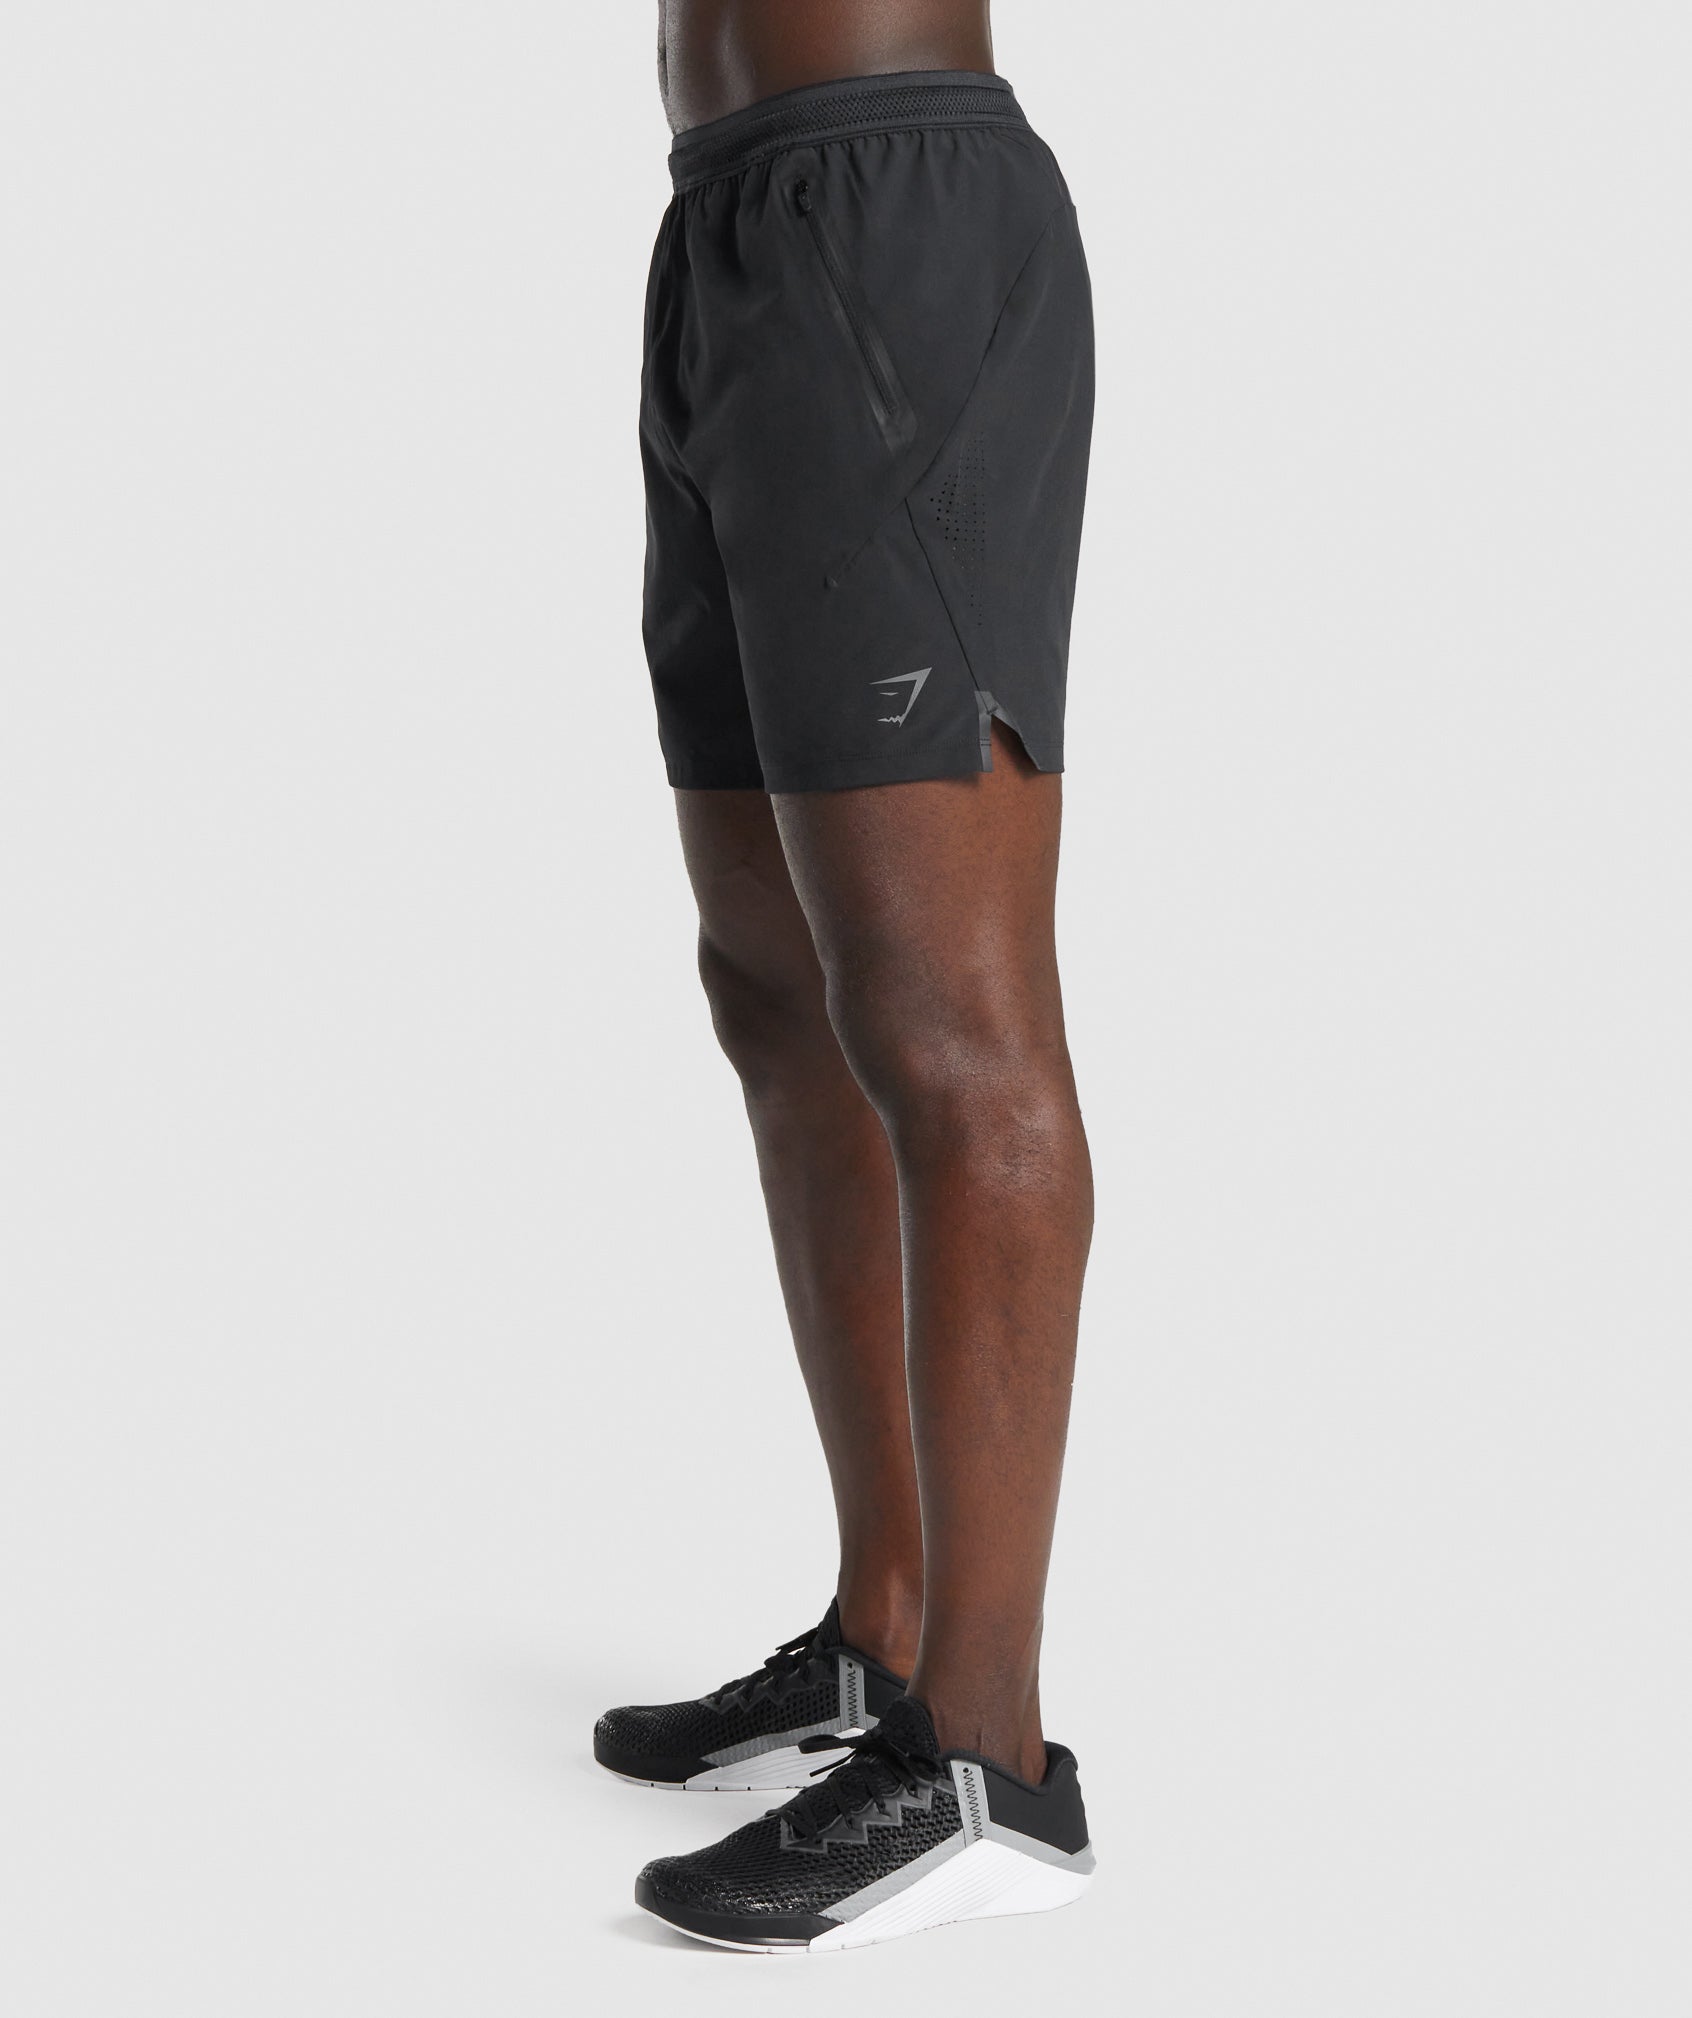 Apex 7" Perform Shorts in Black - view 4